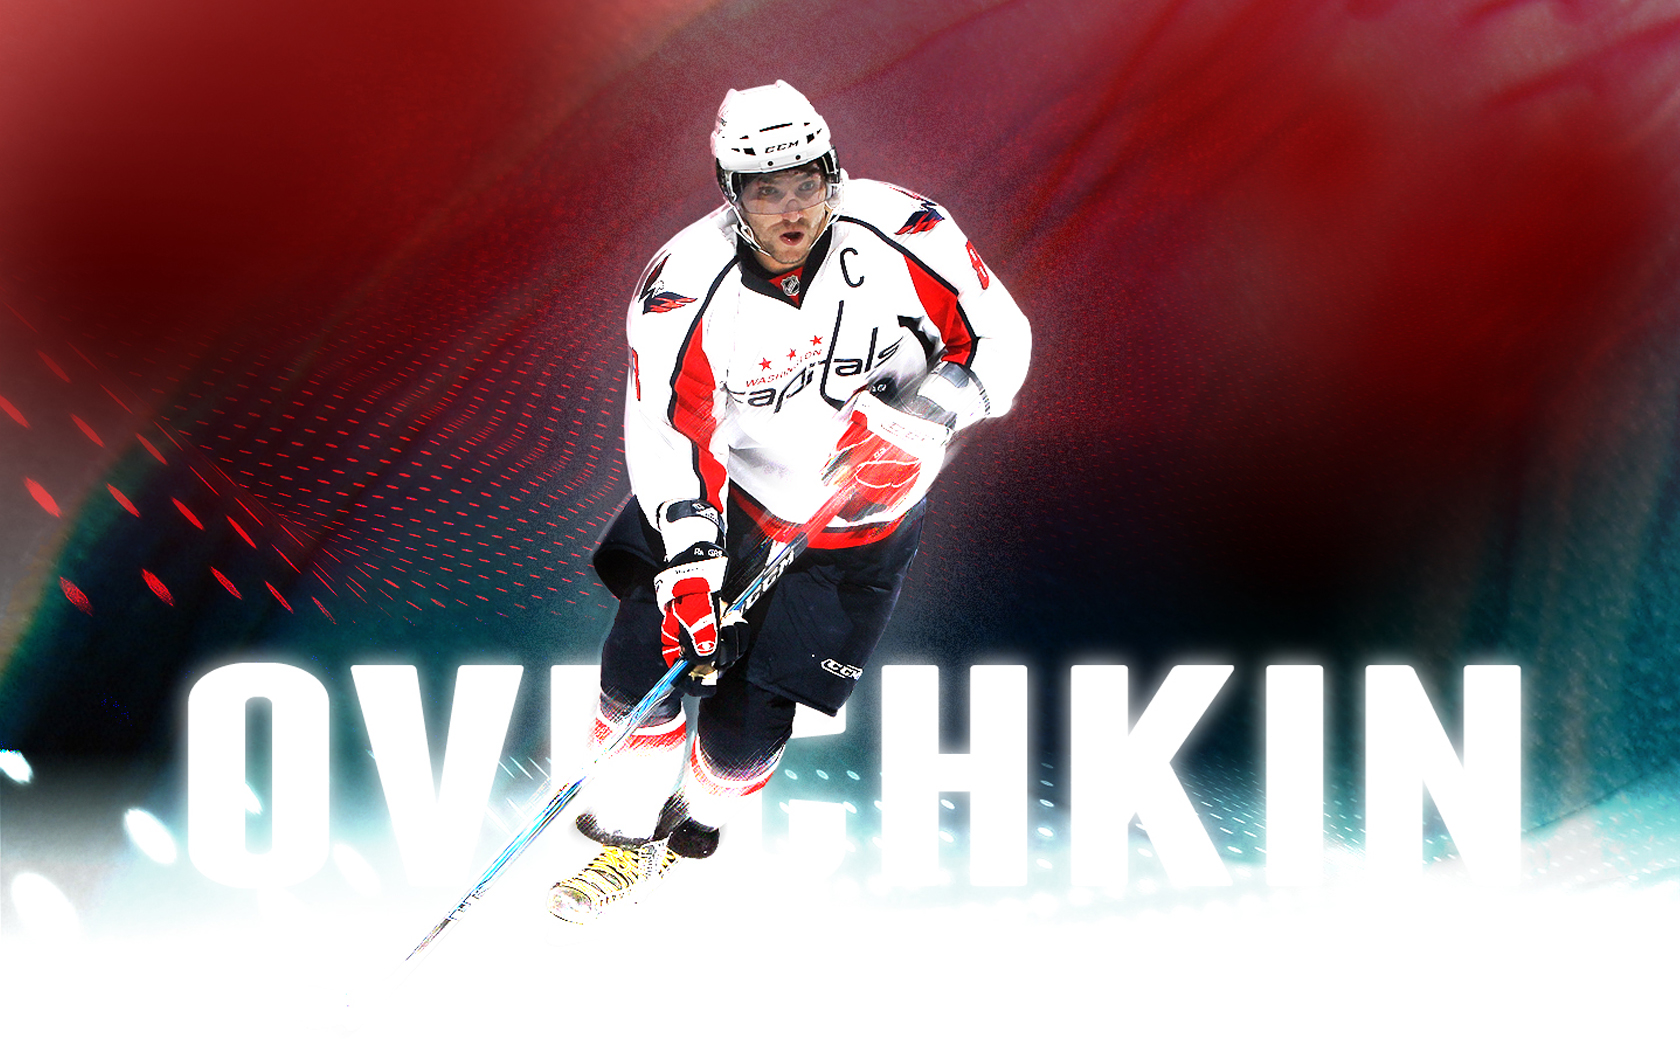 Alex Ovechkin Fanpage  This is certainly different  𝗖𝗢𝗟𝗢𝗥𝗦  𝗥𝗘𝗠𝗜𝗫𝗘𝗗  first of a series Reimagining NHL color palettes  Starting with aleksandrovechkinofficial and the capitals  smsports  allcaps washingtondc capitals jersey 